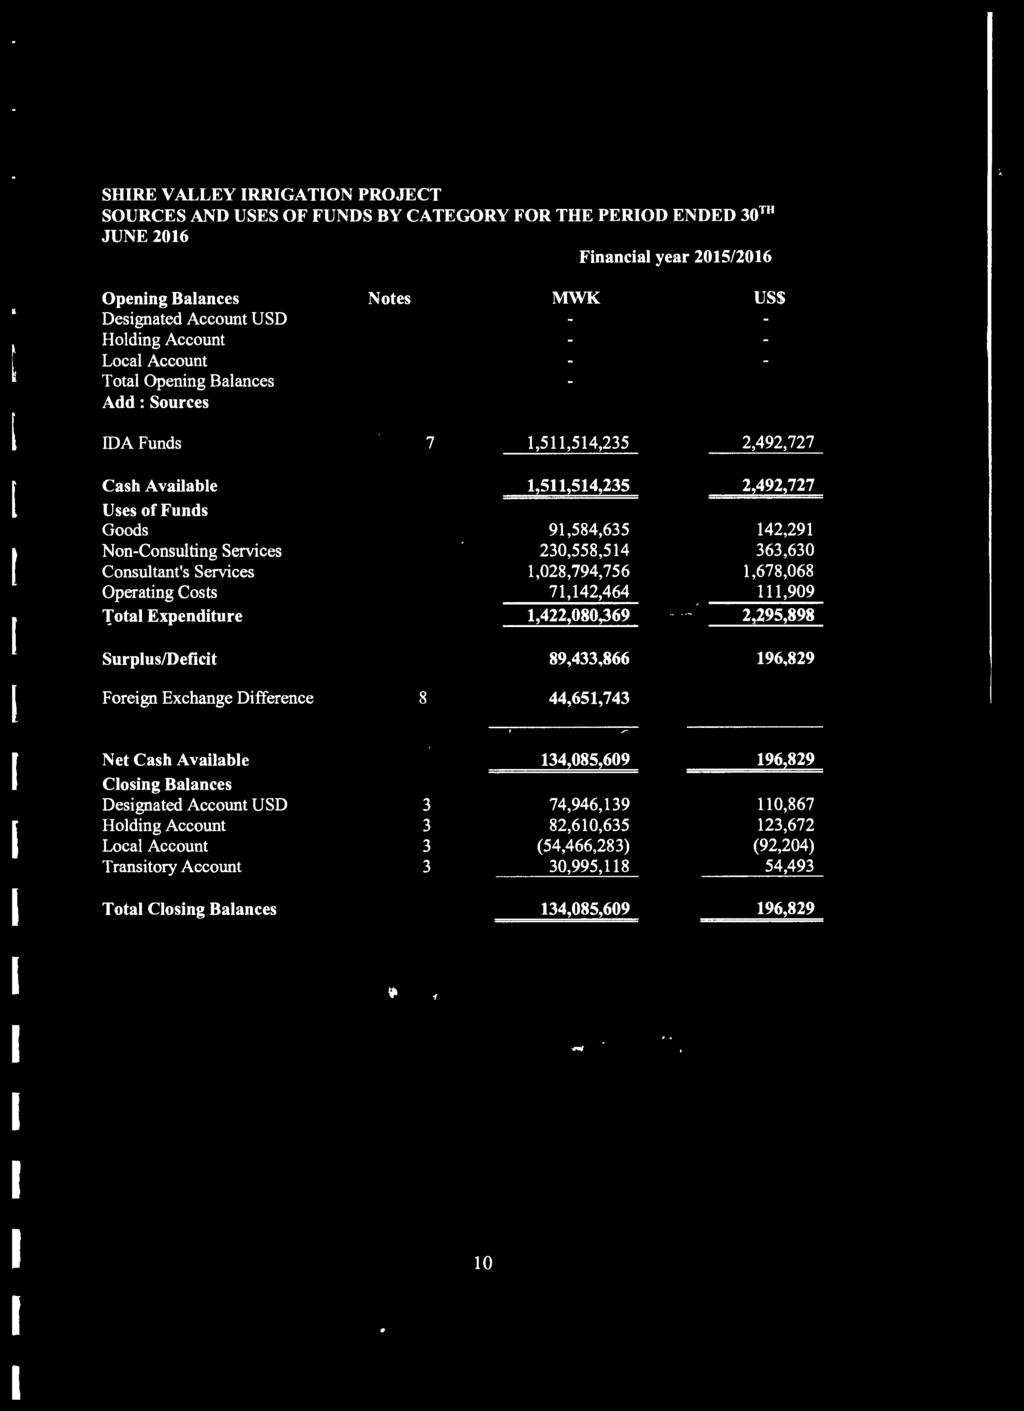 230,558,514 363,630 Consultant's Services 1,028,794,756 1,678,068 Operating Costs 71,142,464 111,909 Total Expenditure 1,422,080,369 2,:?